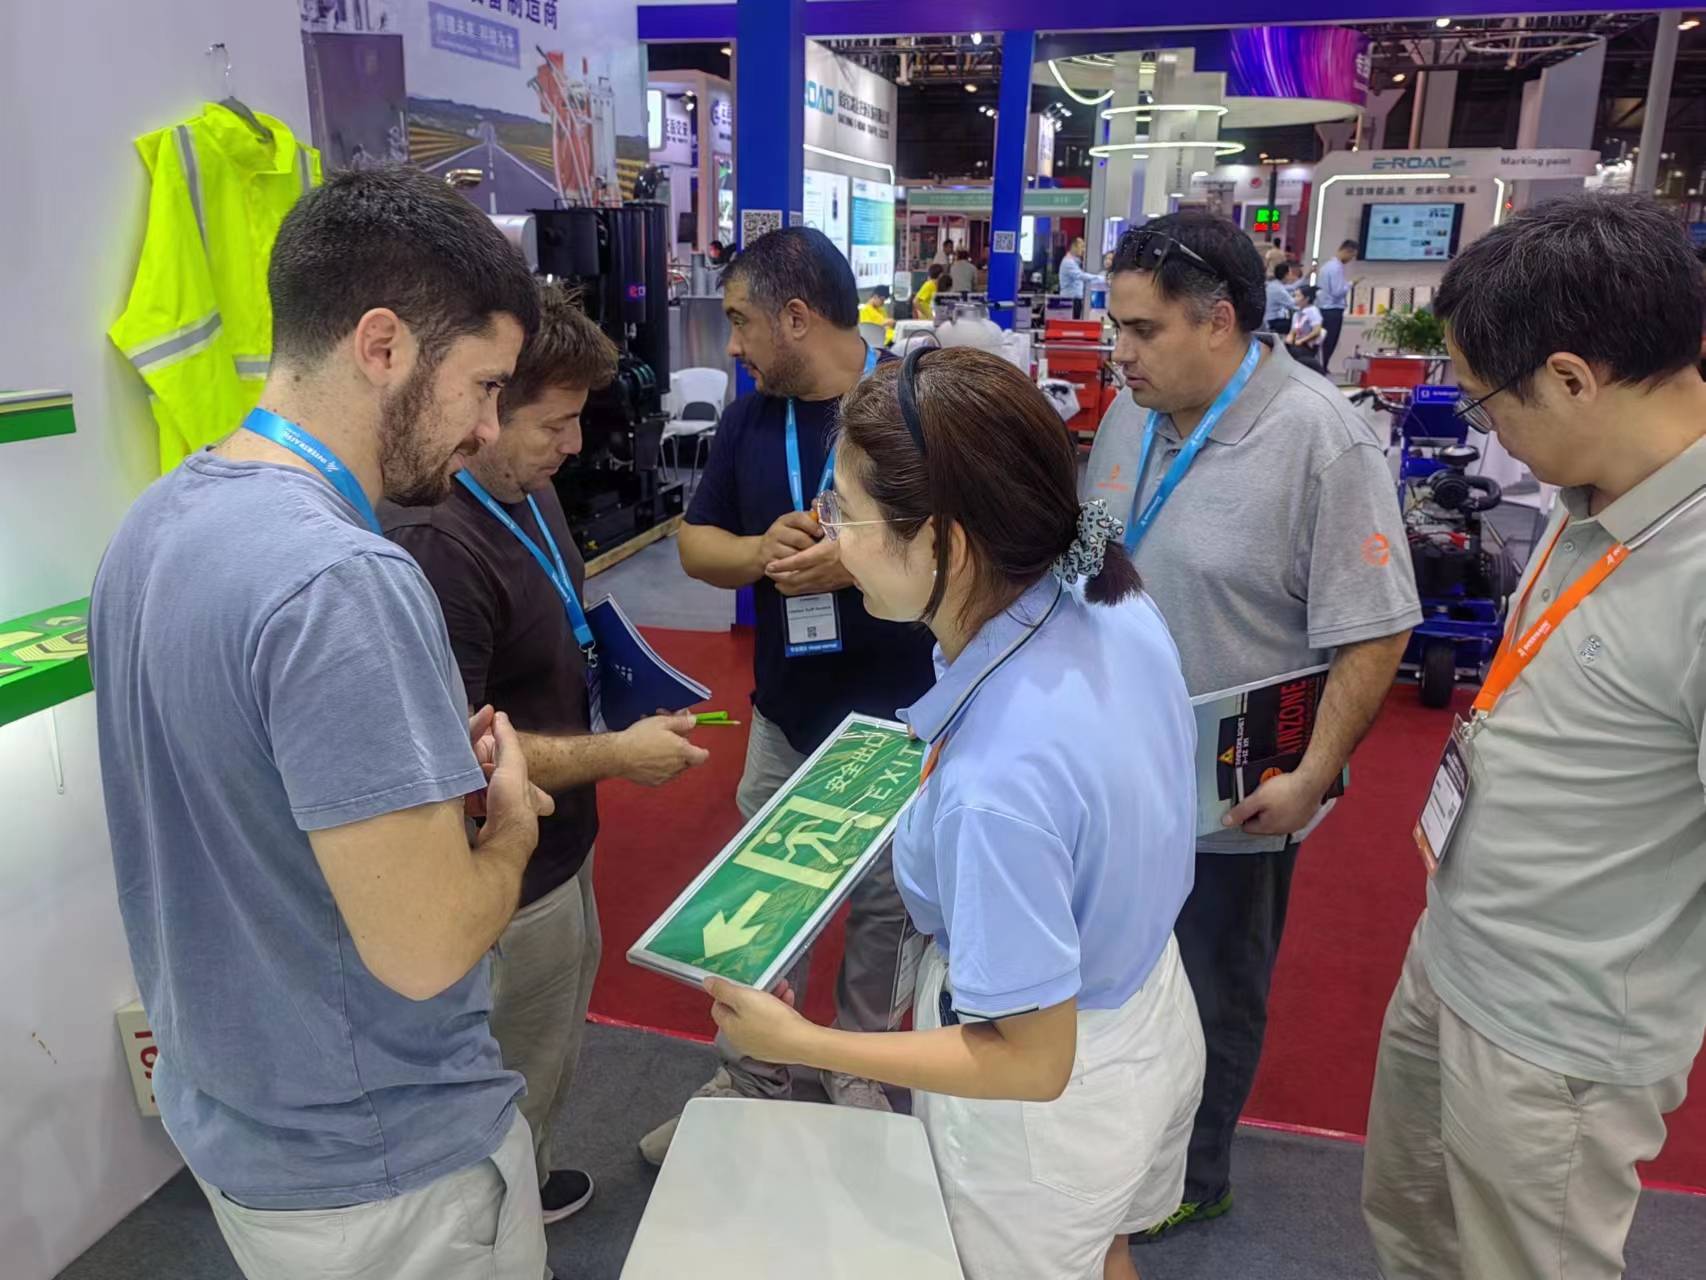 Longlow Traffic Safety Device Co., Ltd. Made a Stunning Debut at the 2023 INTERTRAFFIC Shanghai, Garnering Acclaim for Its Innovative Traffic Safety Products